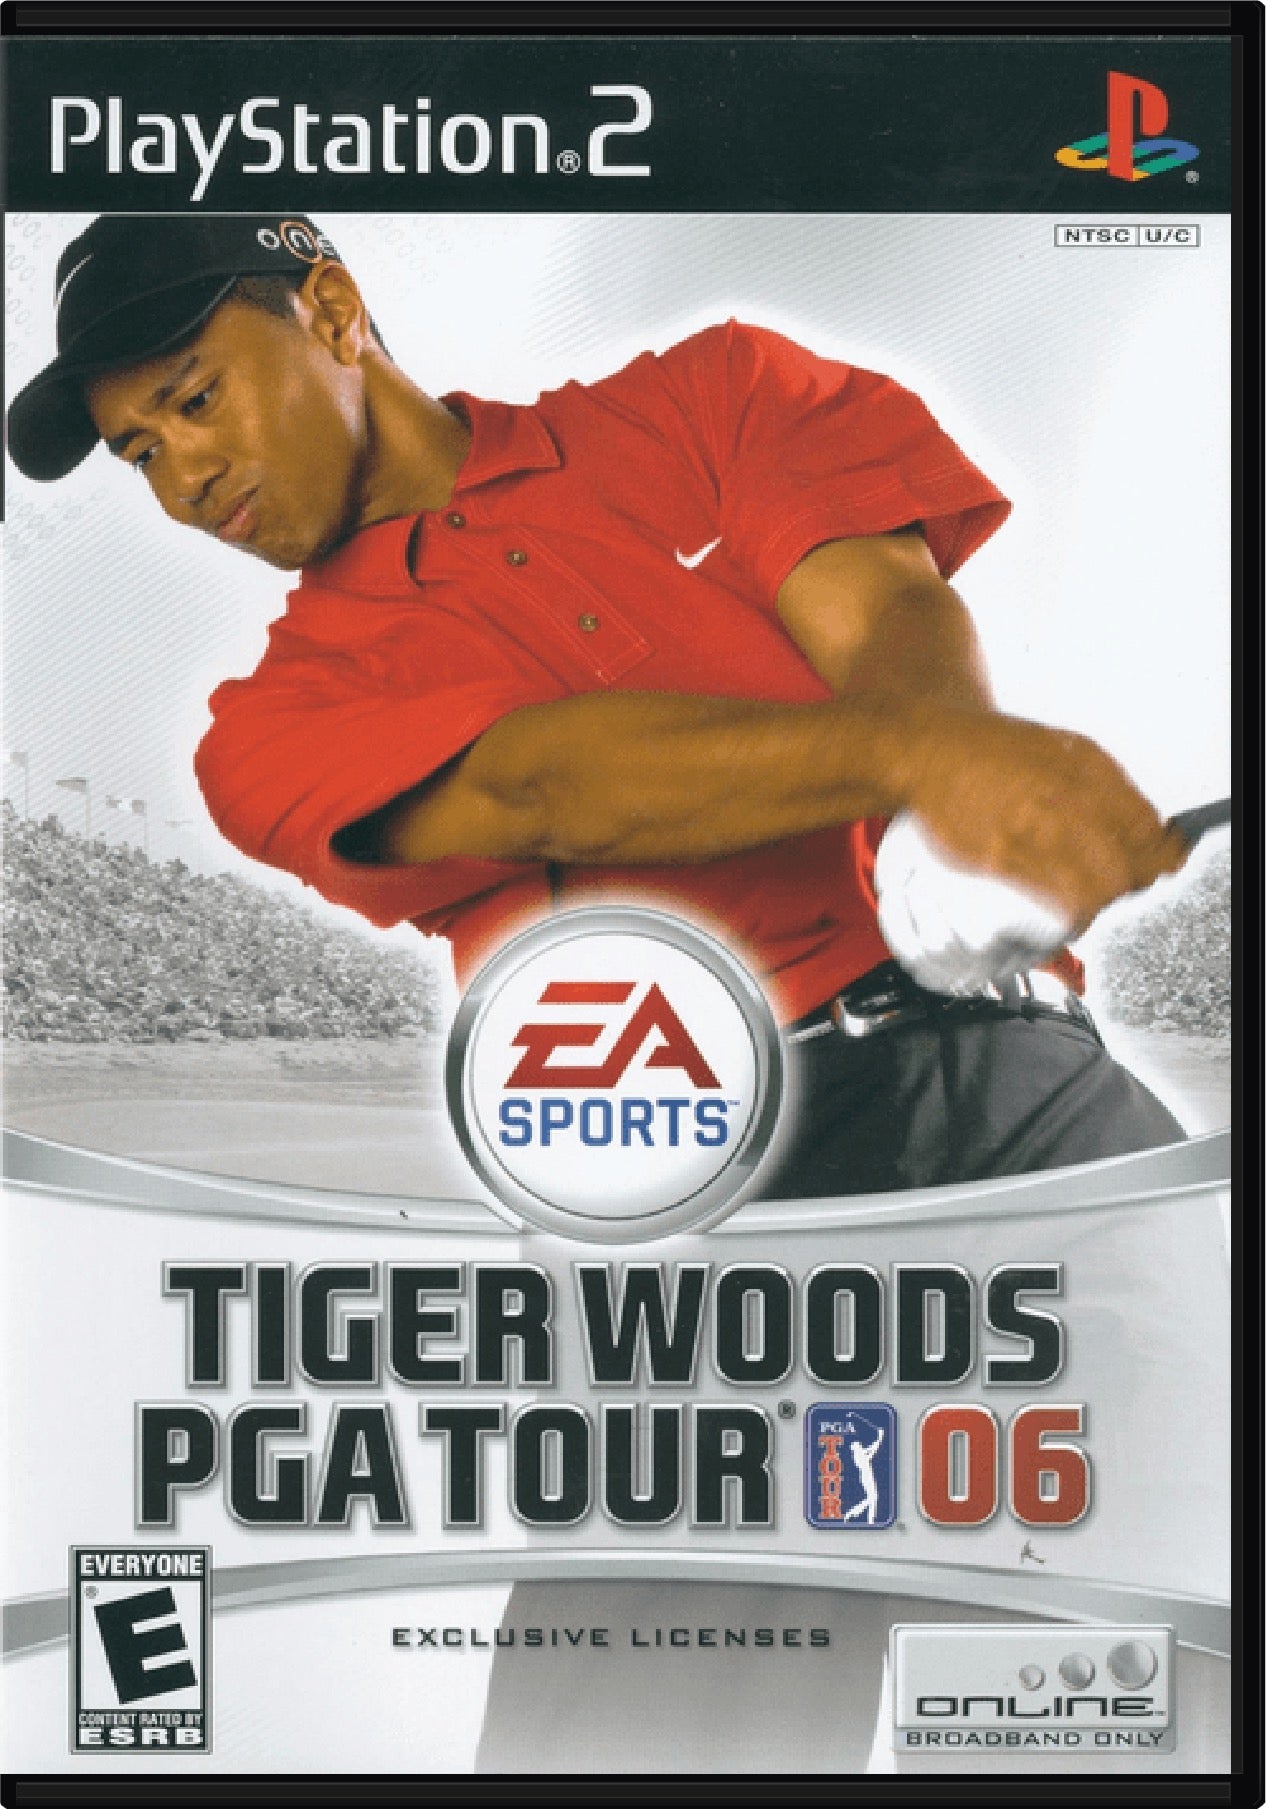 Tiger Woods PGA Tour 06 Cover Art and Product Photo